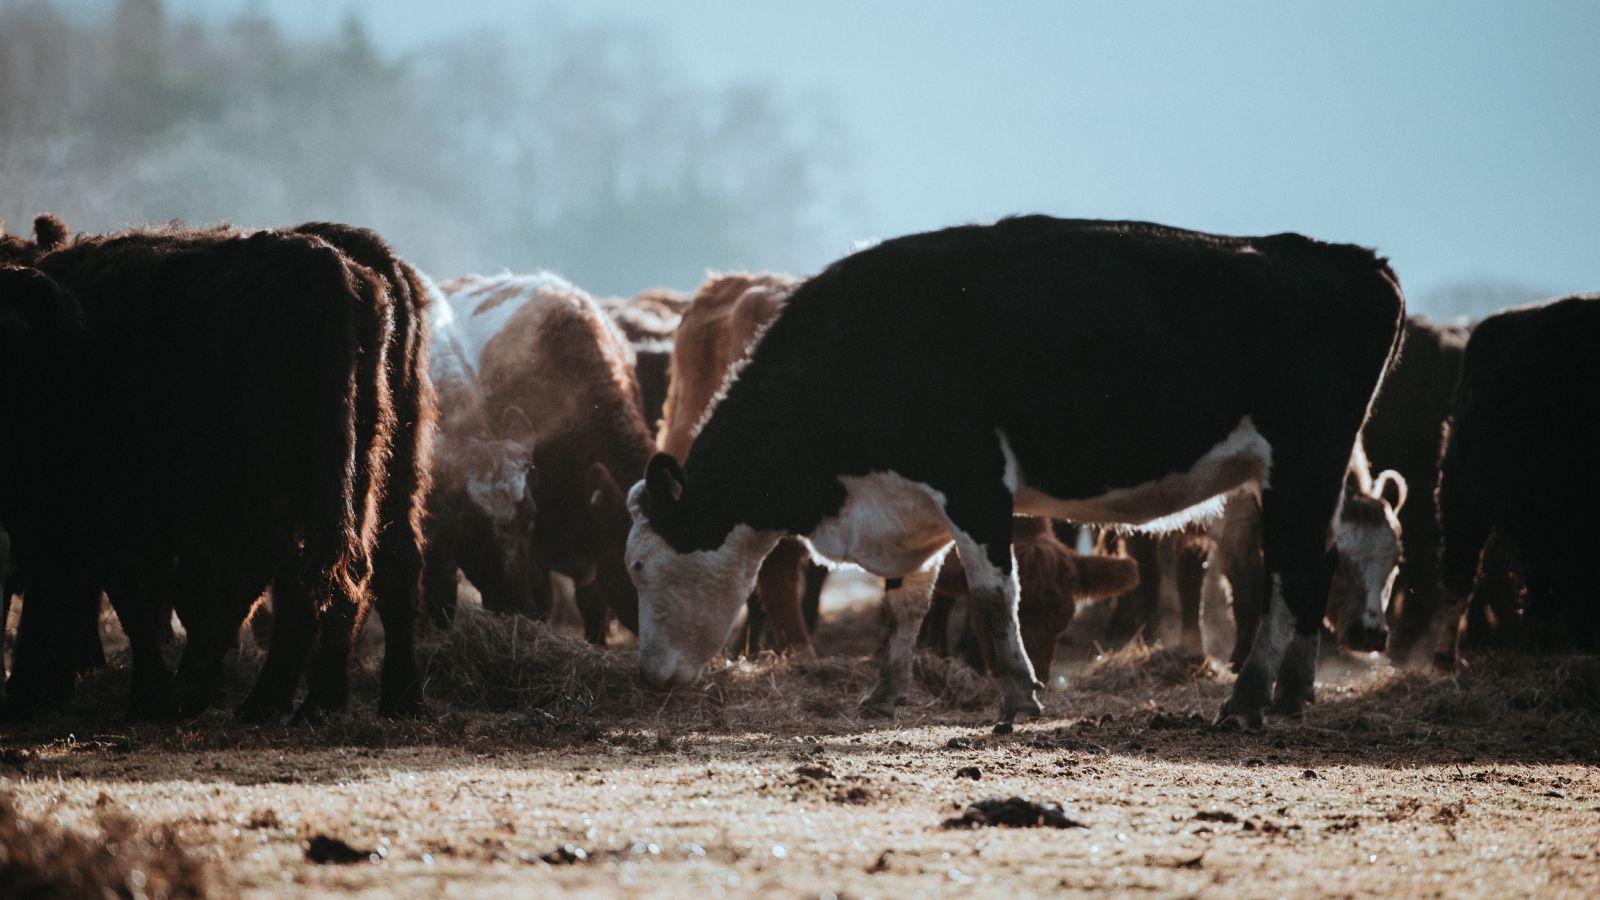 Brown cows feeding on dusty ground with blue sky above